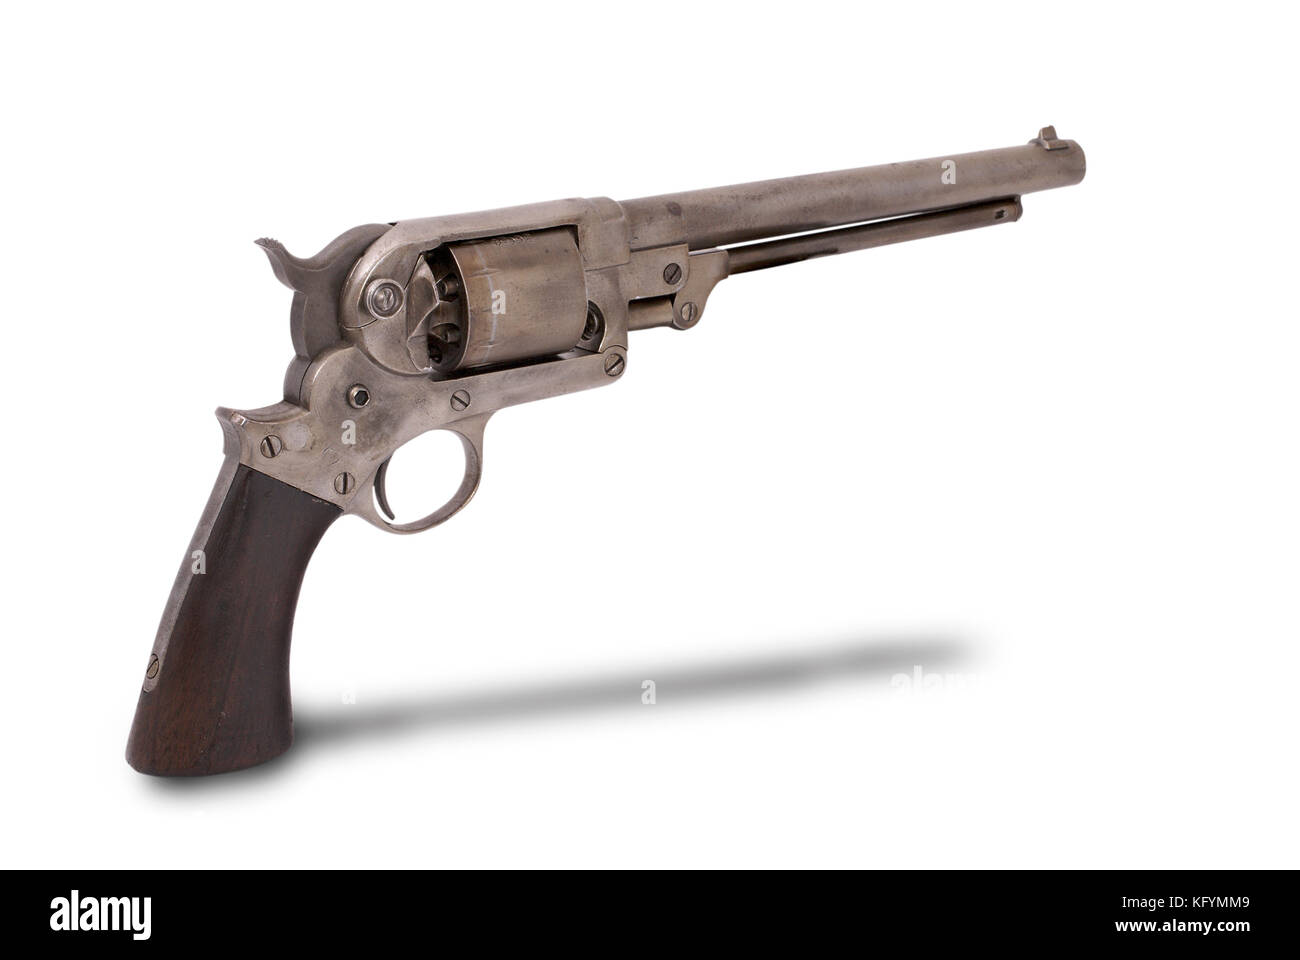 The USA .44 caliber six-shot revolver. The double-action revolver of the Starr system from the American Civil War time. The path on the white backgrou Stock Photo